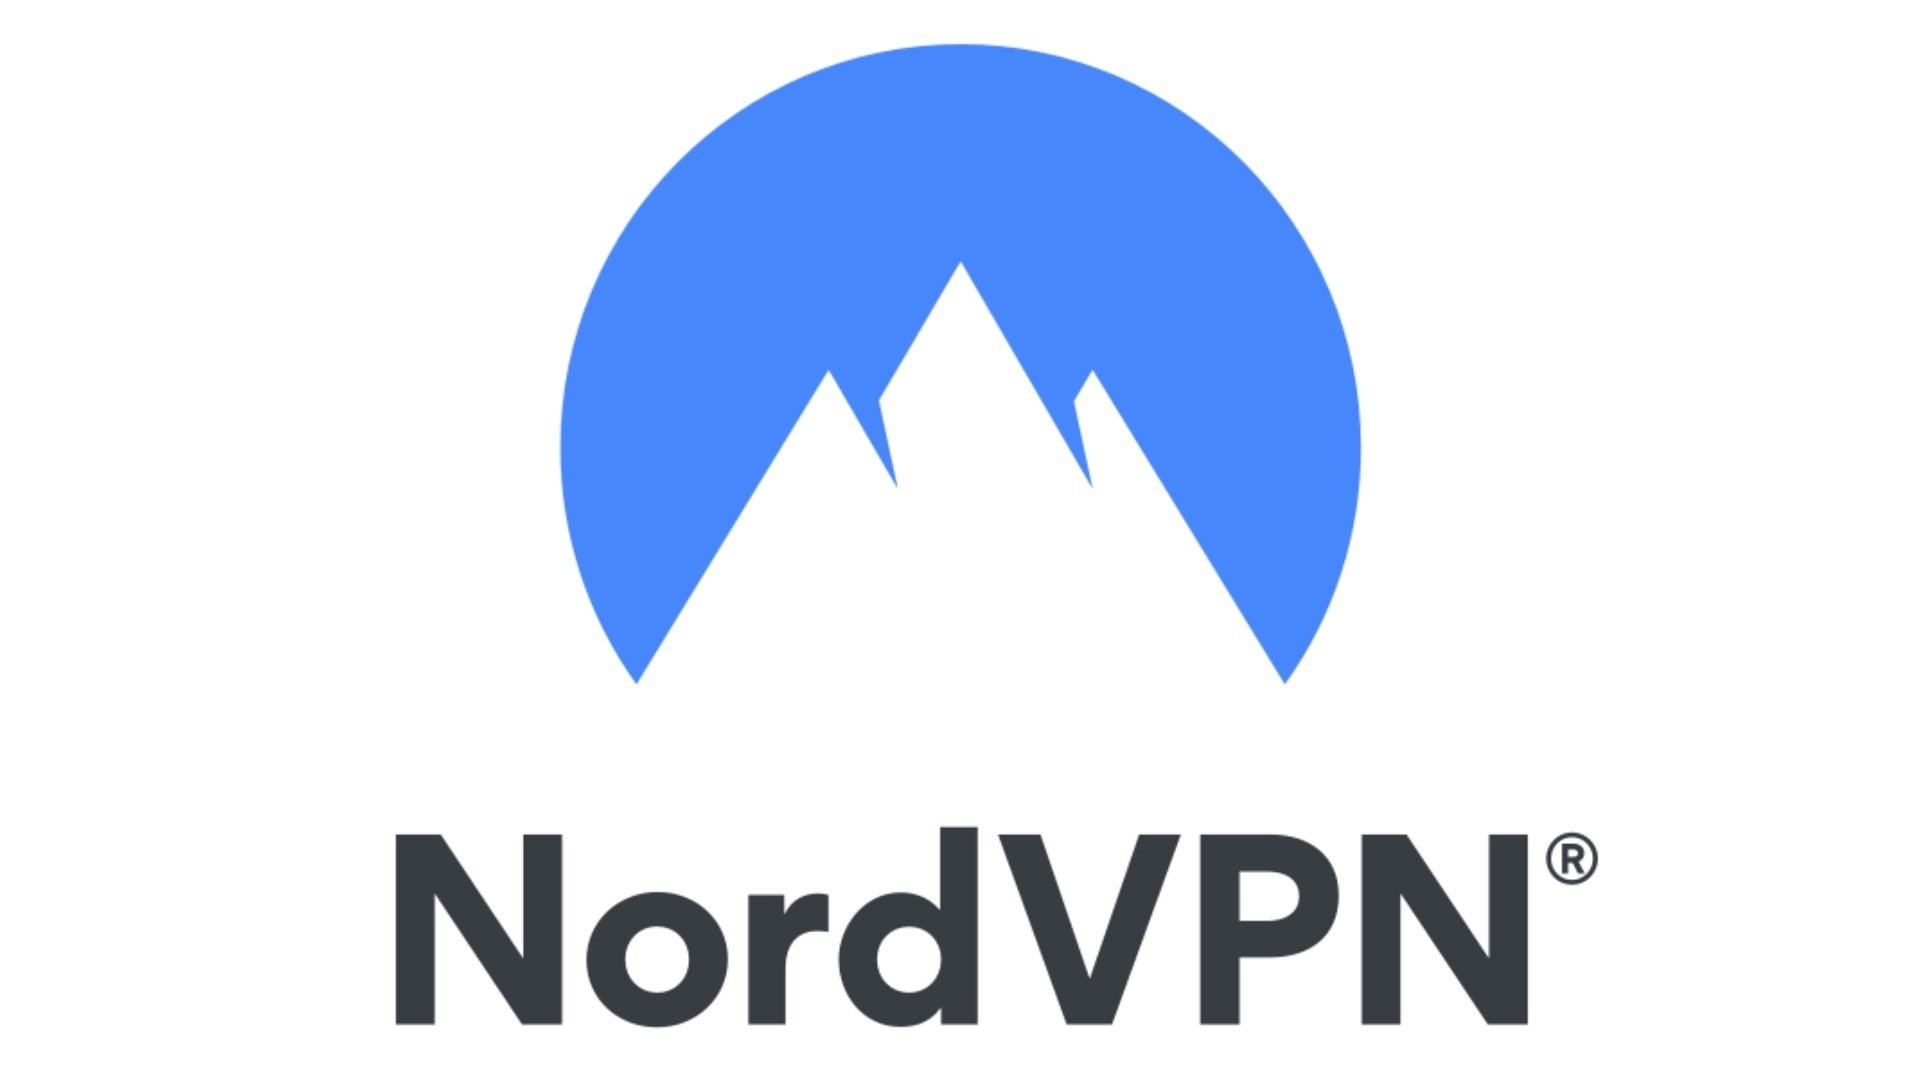 Best VPN for streaming - NordVPN, Its logo is shown on a white background.